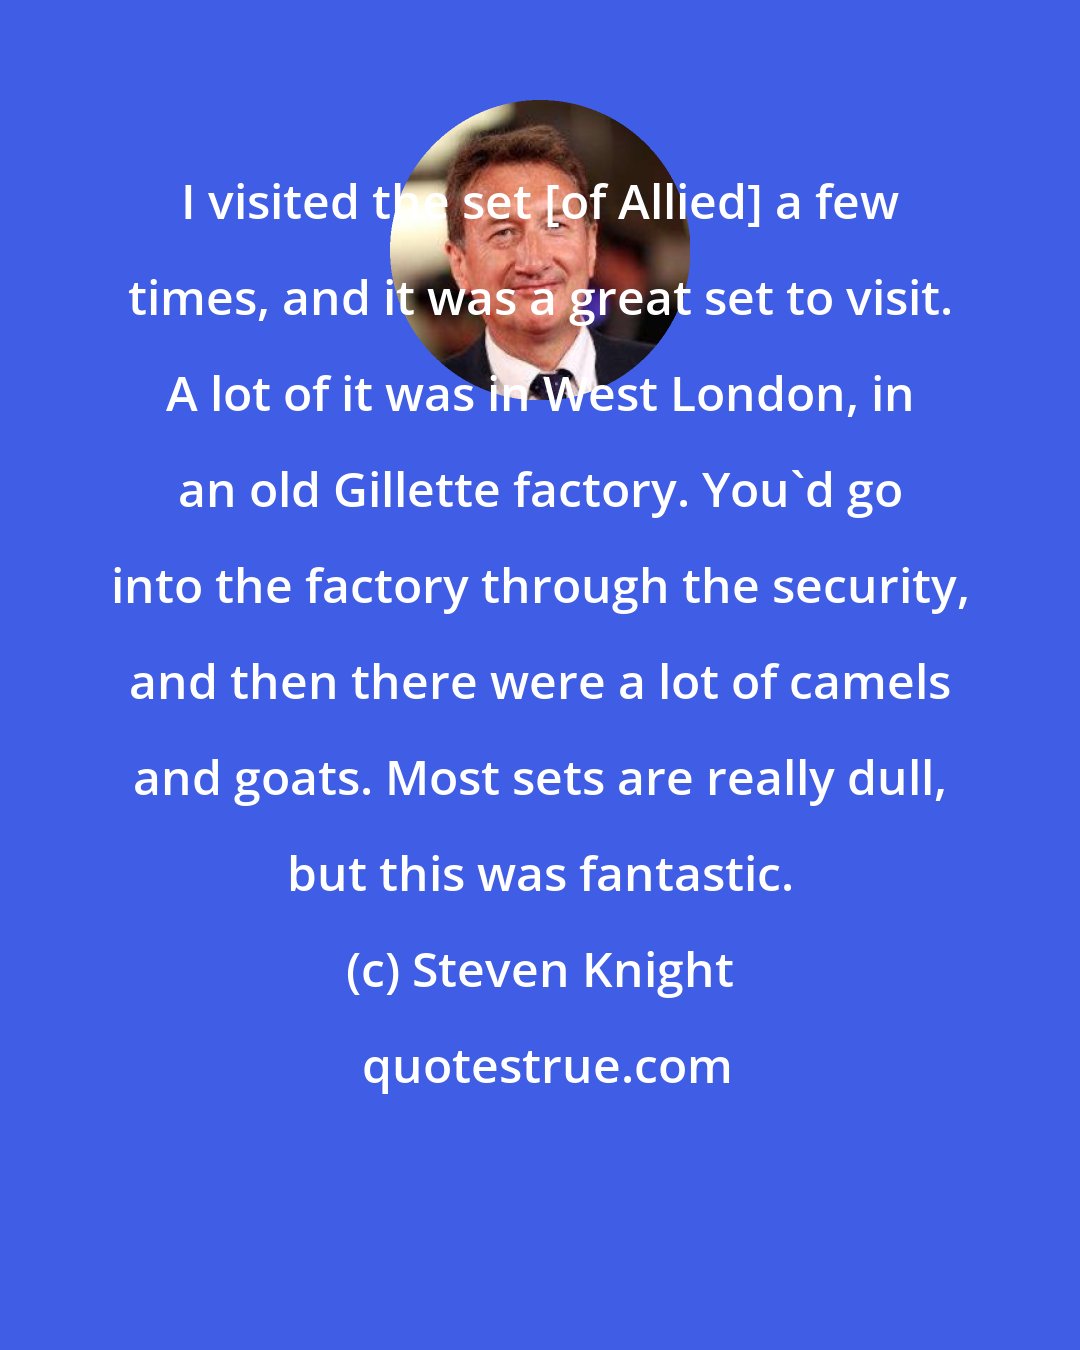 Steven Knight: I visited the set [of Allied] a few times, and it was a great set to visit. A lot of it was in West London, in an old Gillette factory. You'd go into the factory through the security, and then there were a lot of camels and goats. Most sets are really dull, but this was fantastic.